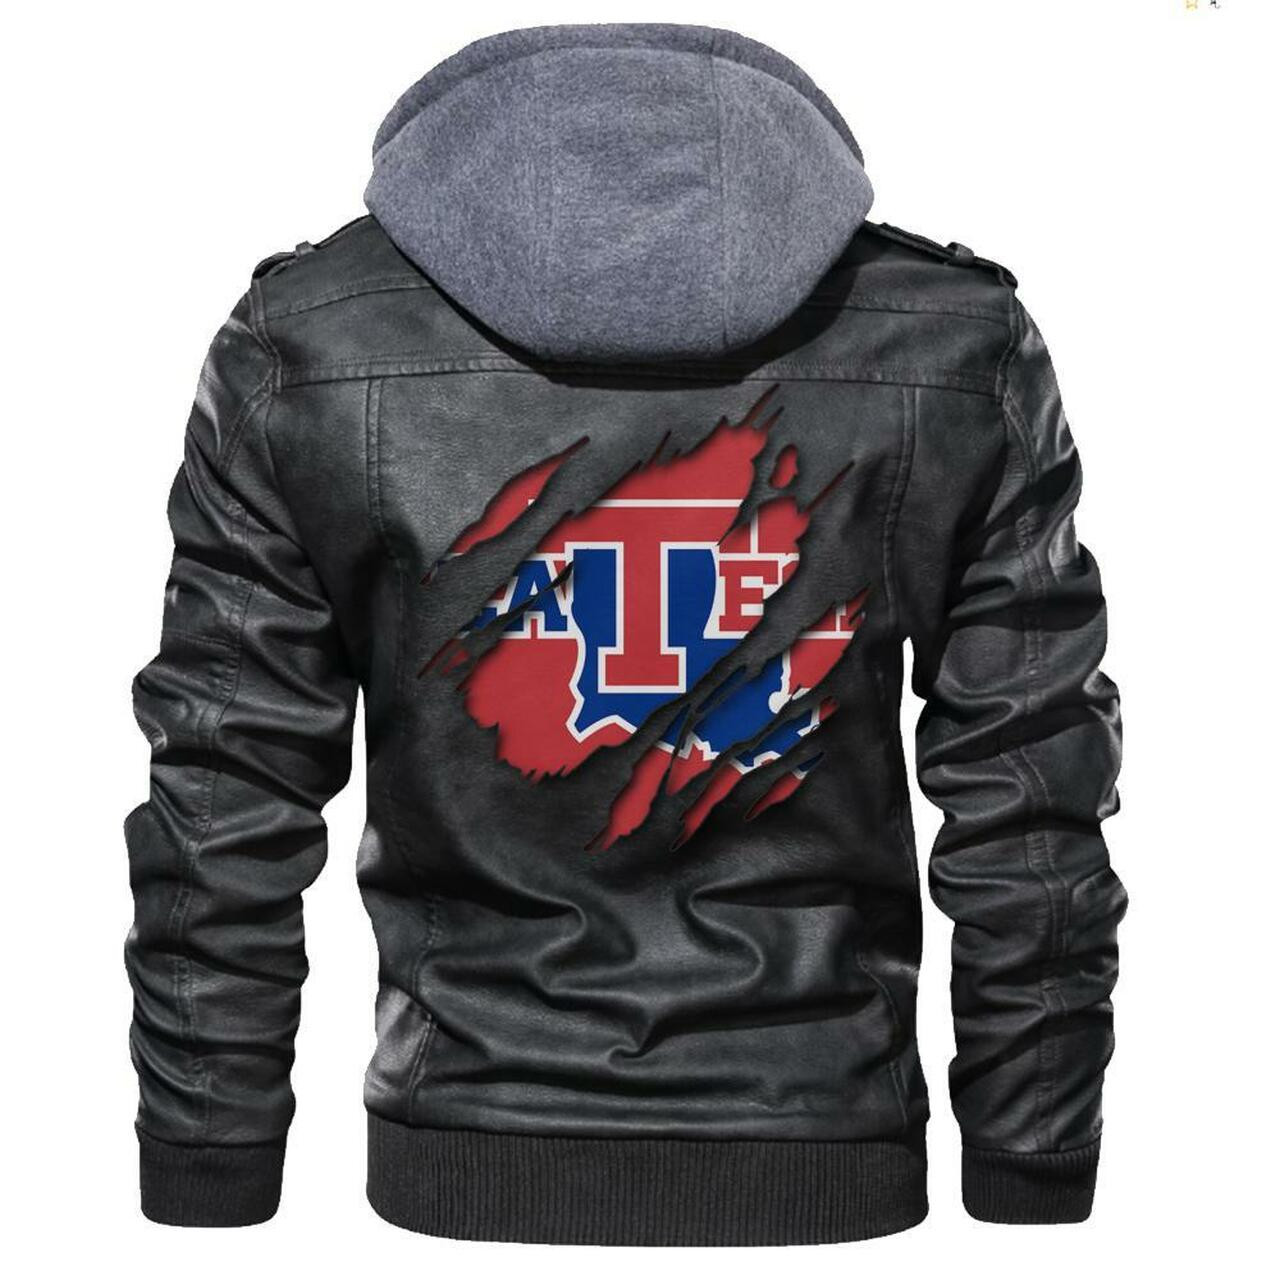 Our store has all of the latest leather jacket 41